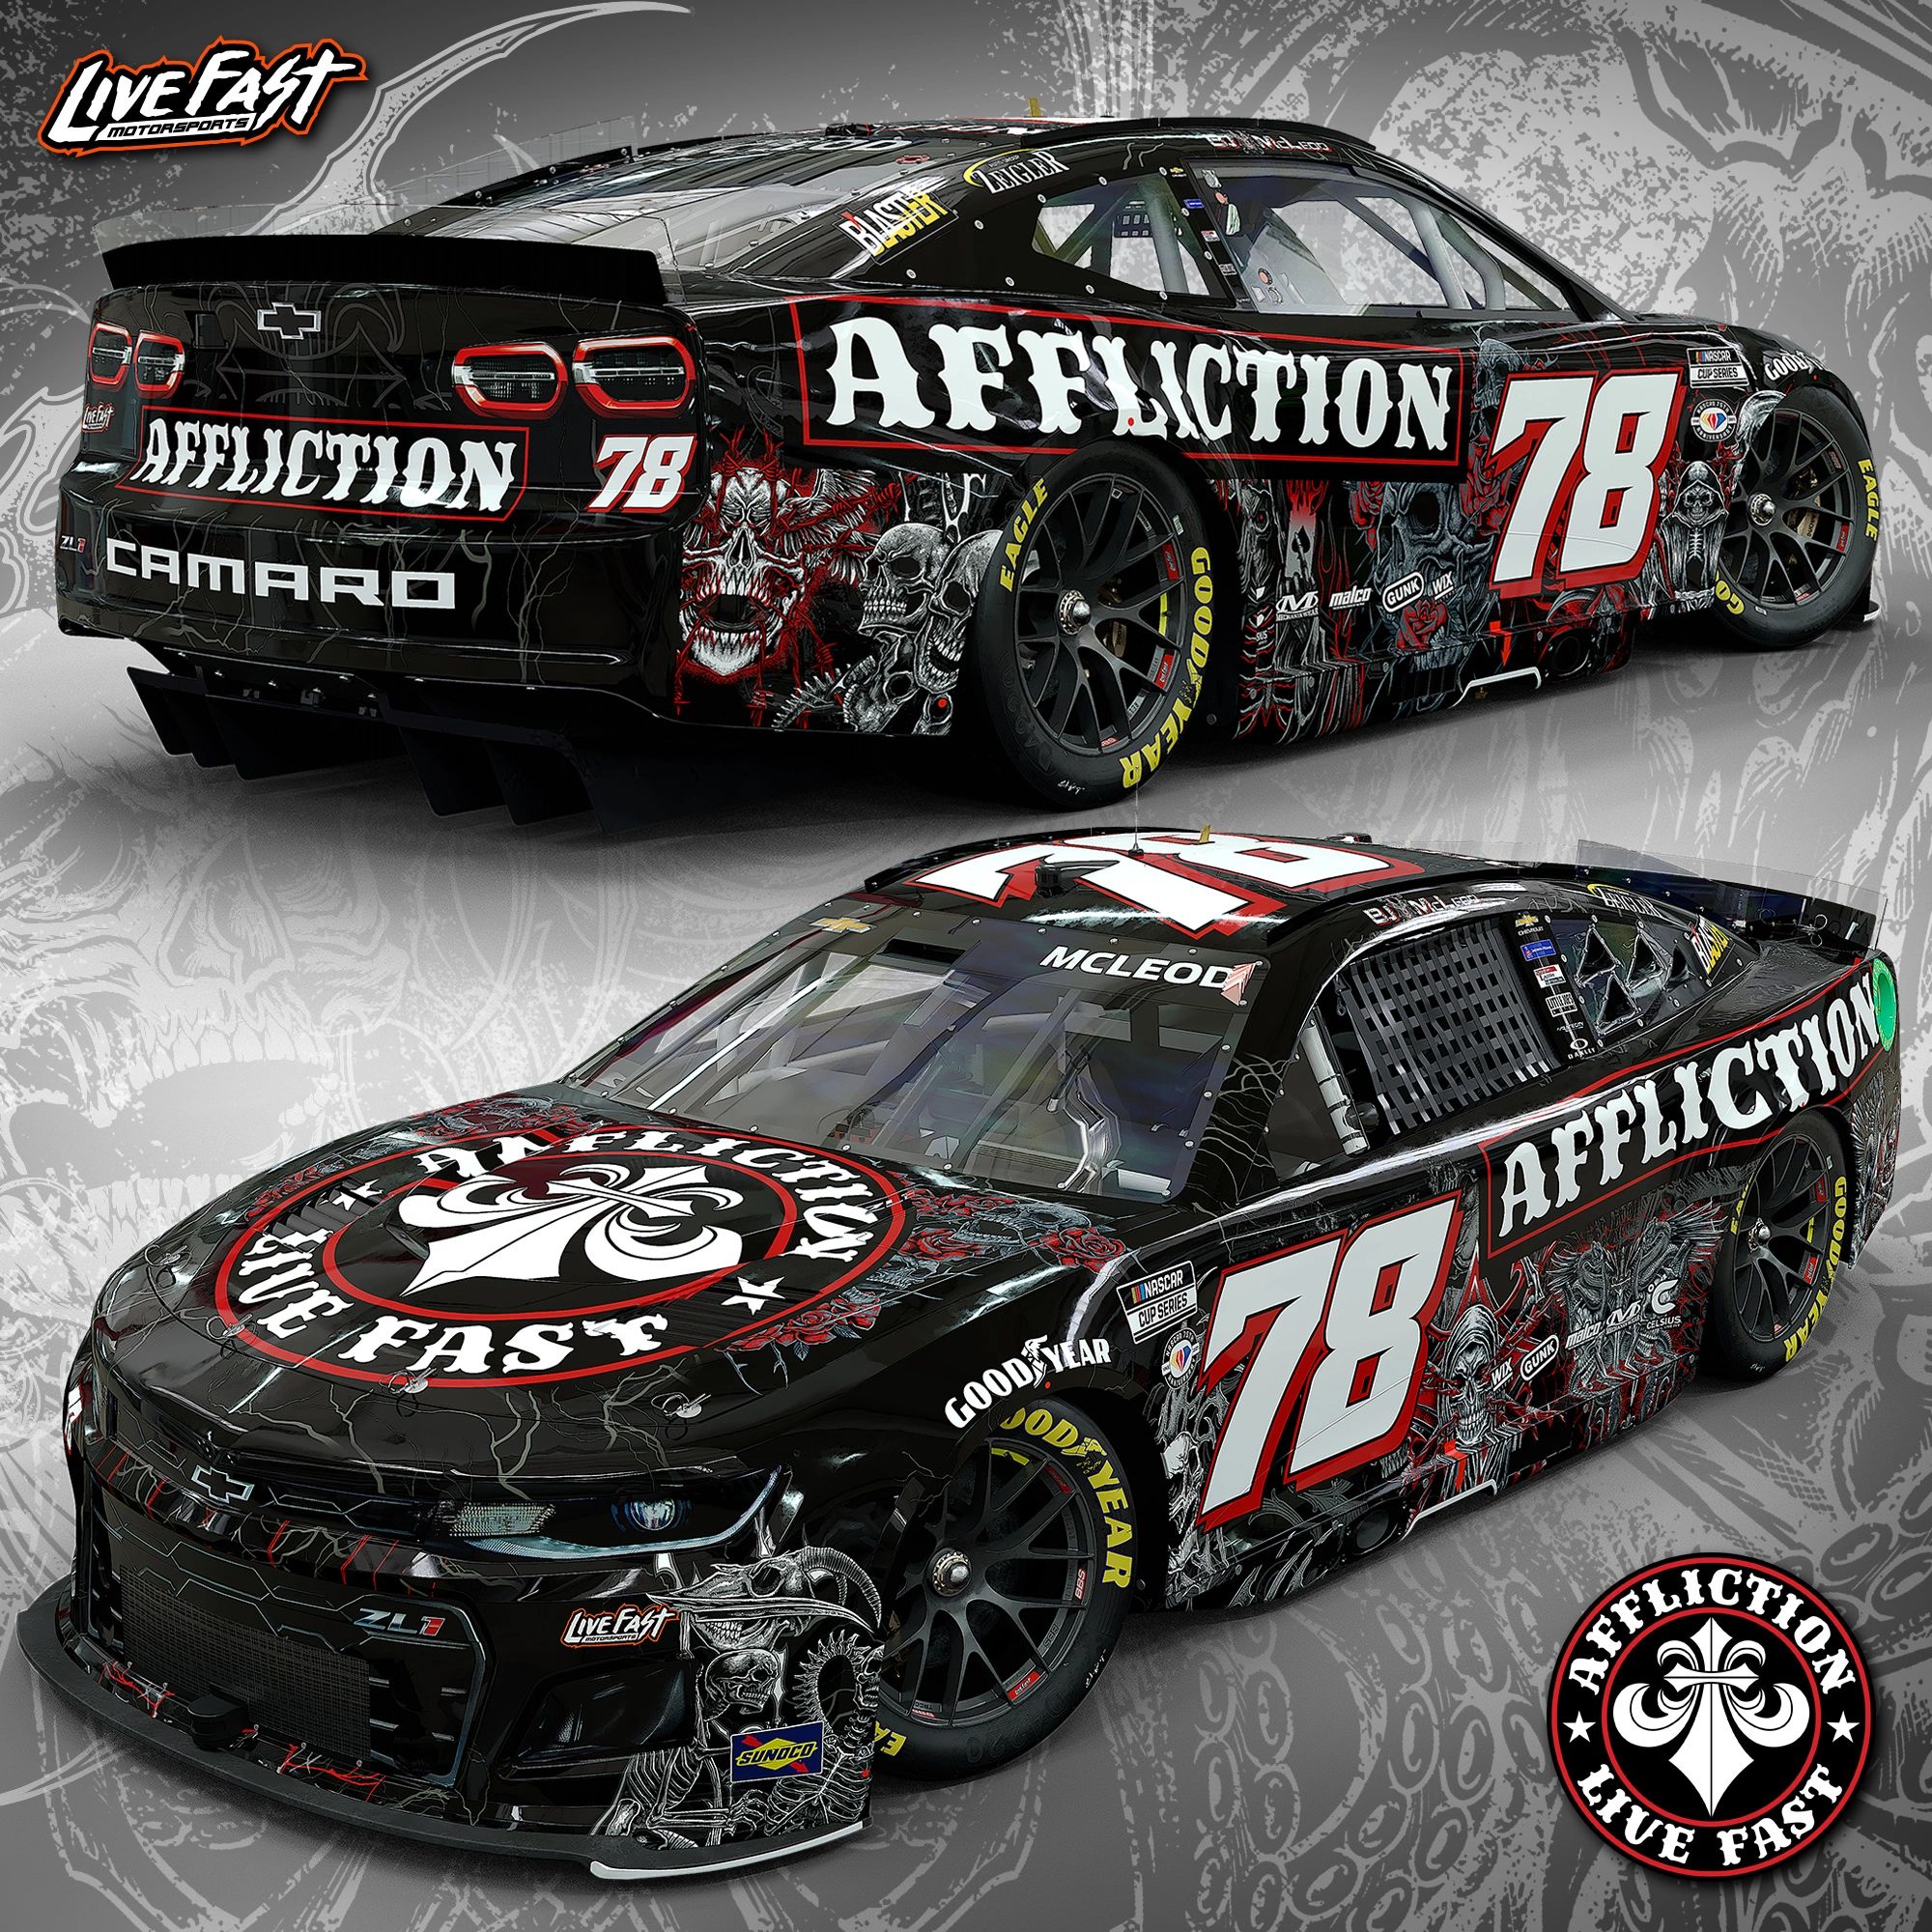 Affliction Clothing Partners with LFM in Darlington